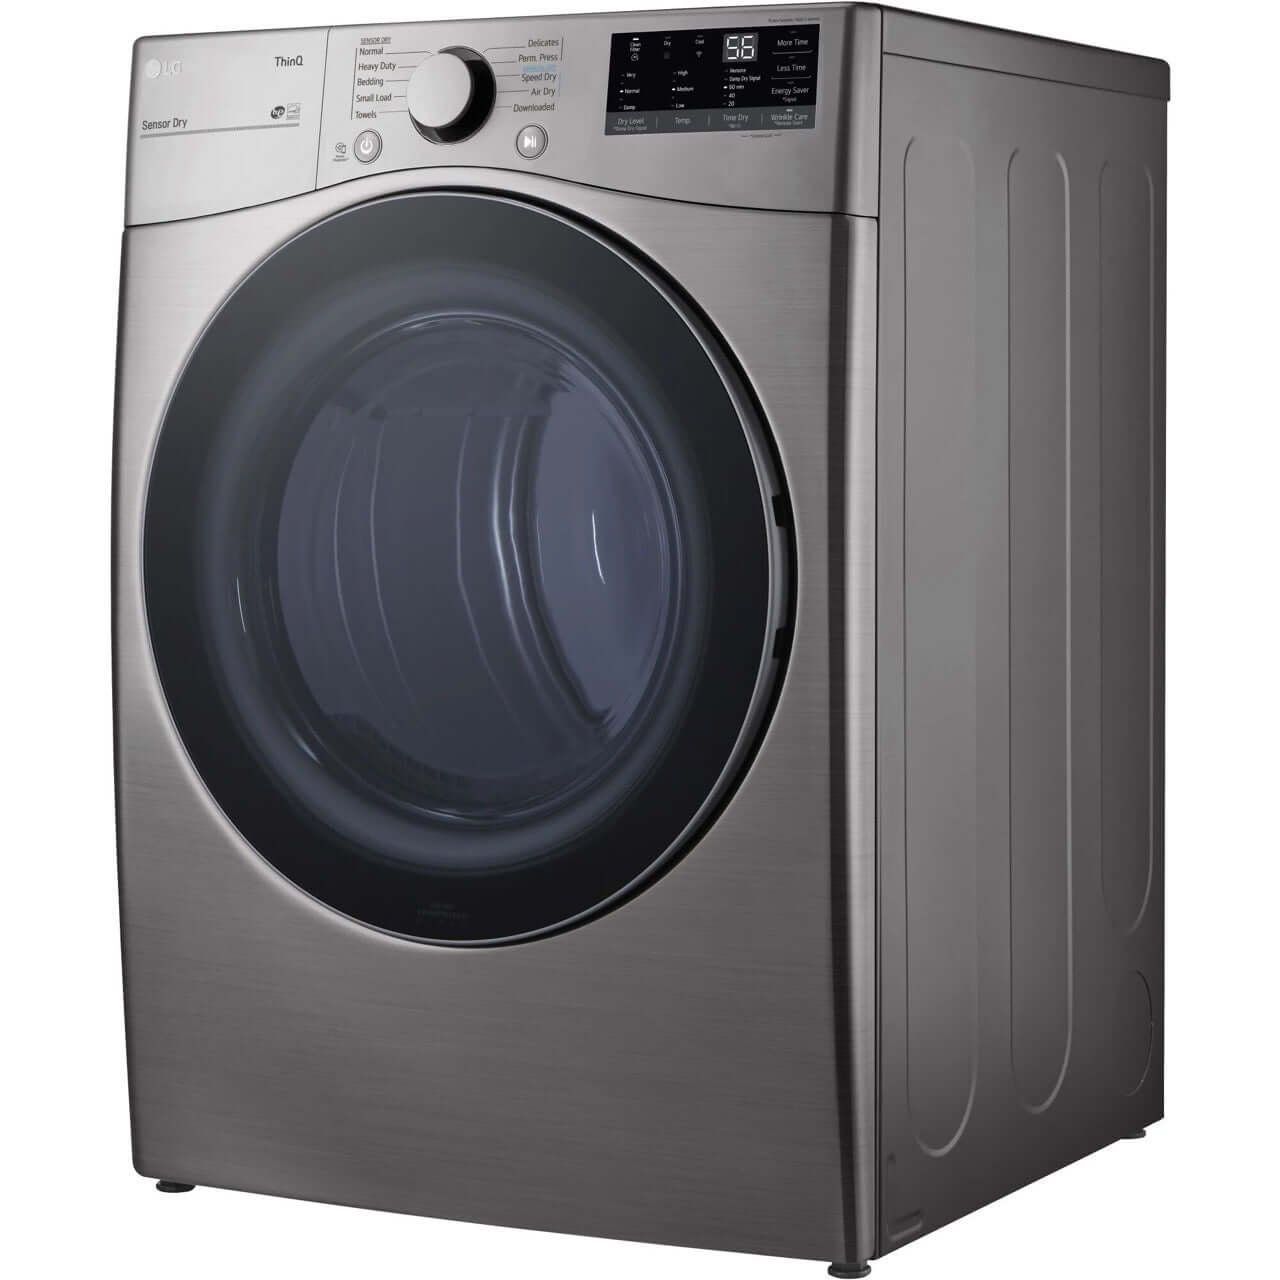 LG 27 In. 7.4-Cu. Ft. Front Load Gas Dryer with Built-In Intelligence in Graphite Steel (DLG3601V)